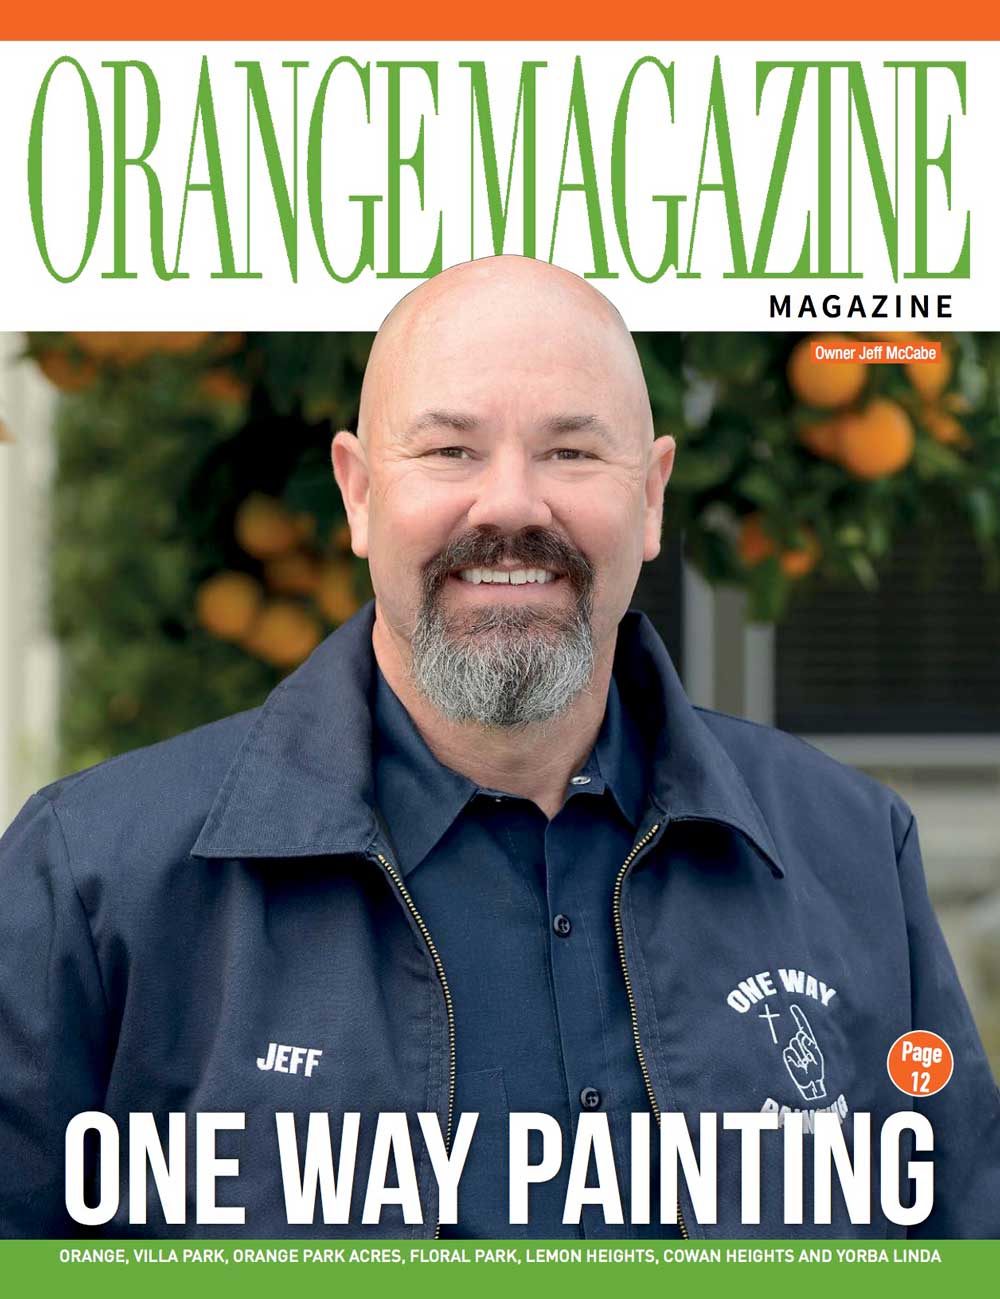 Jeff McCabe on cover of South County magazine